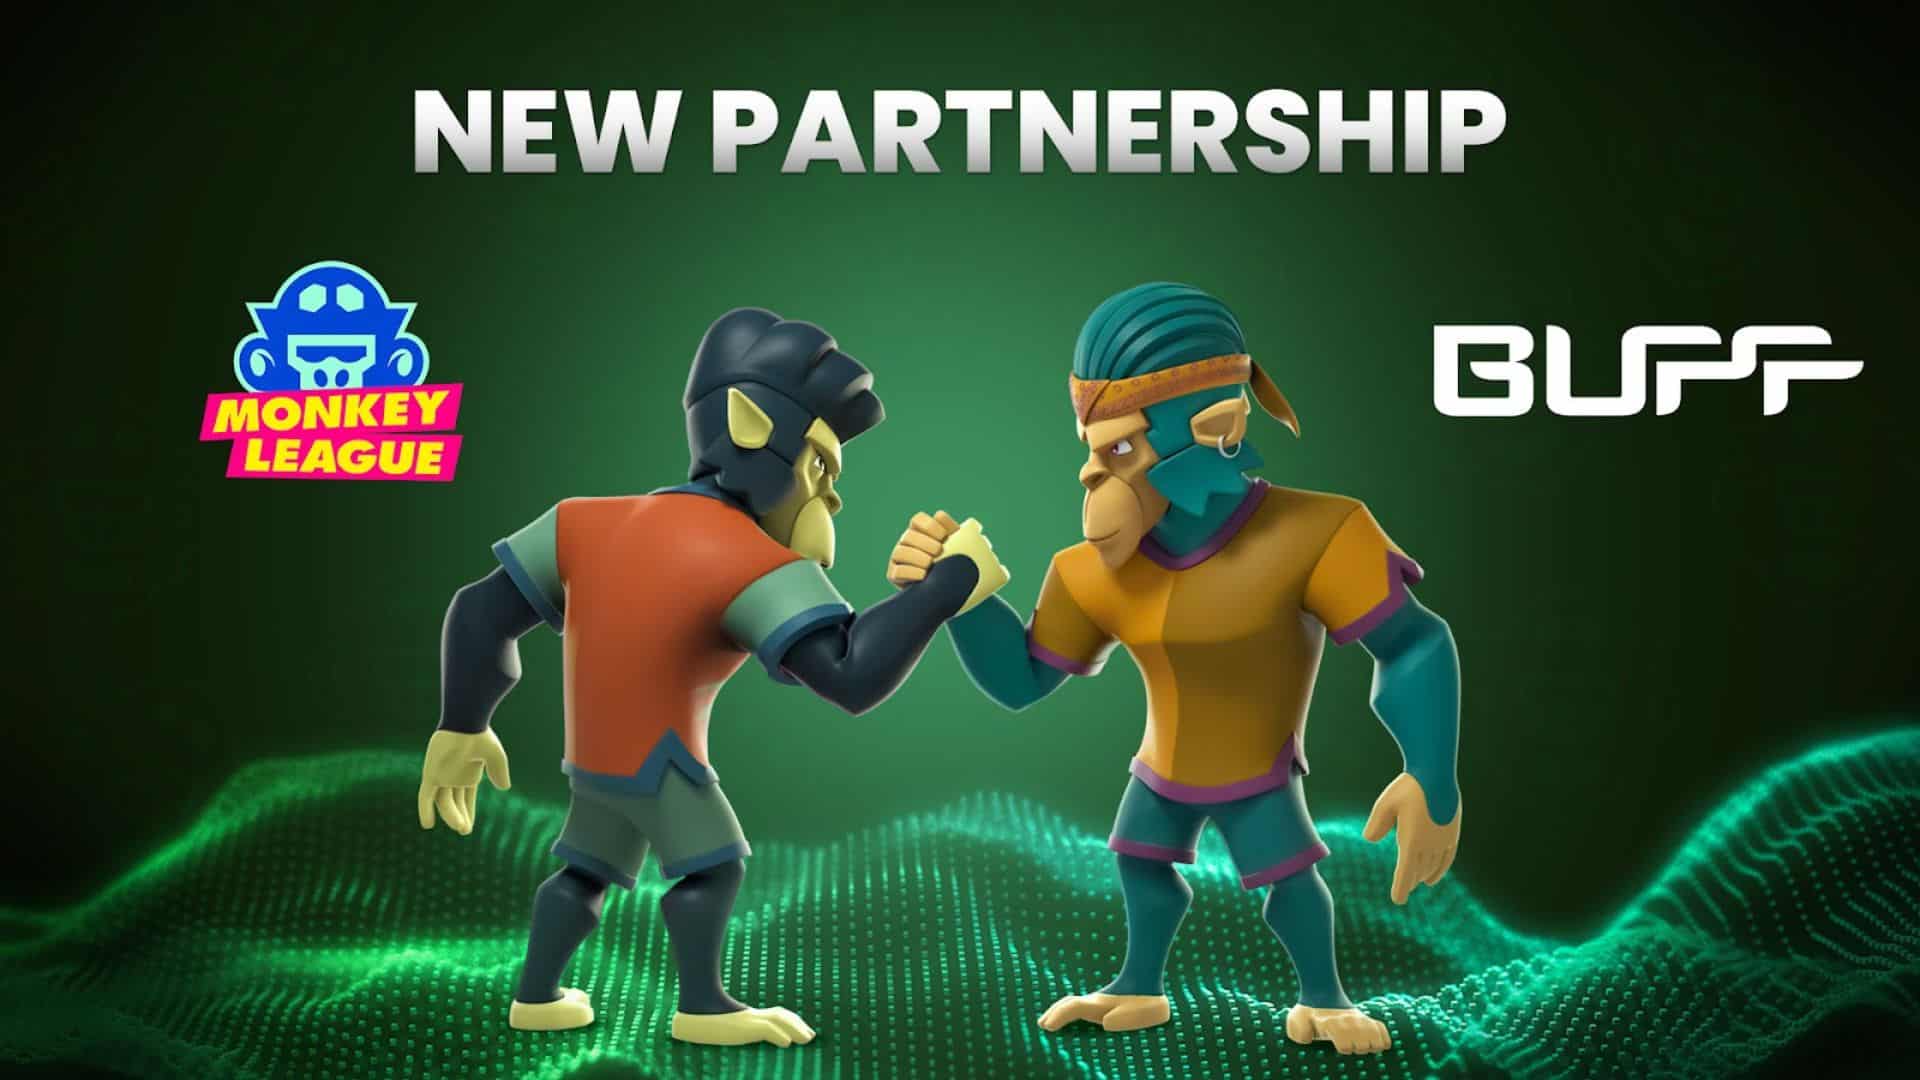 Web3 Gaming Pioneer MonkeyLeague Partners Up With Web2 Gaming Platform BUFF